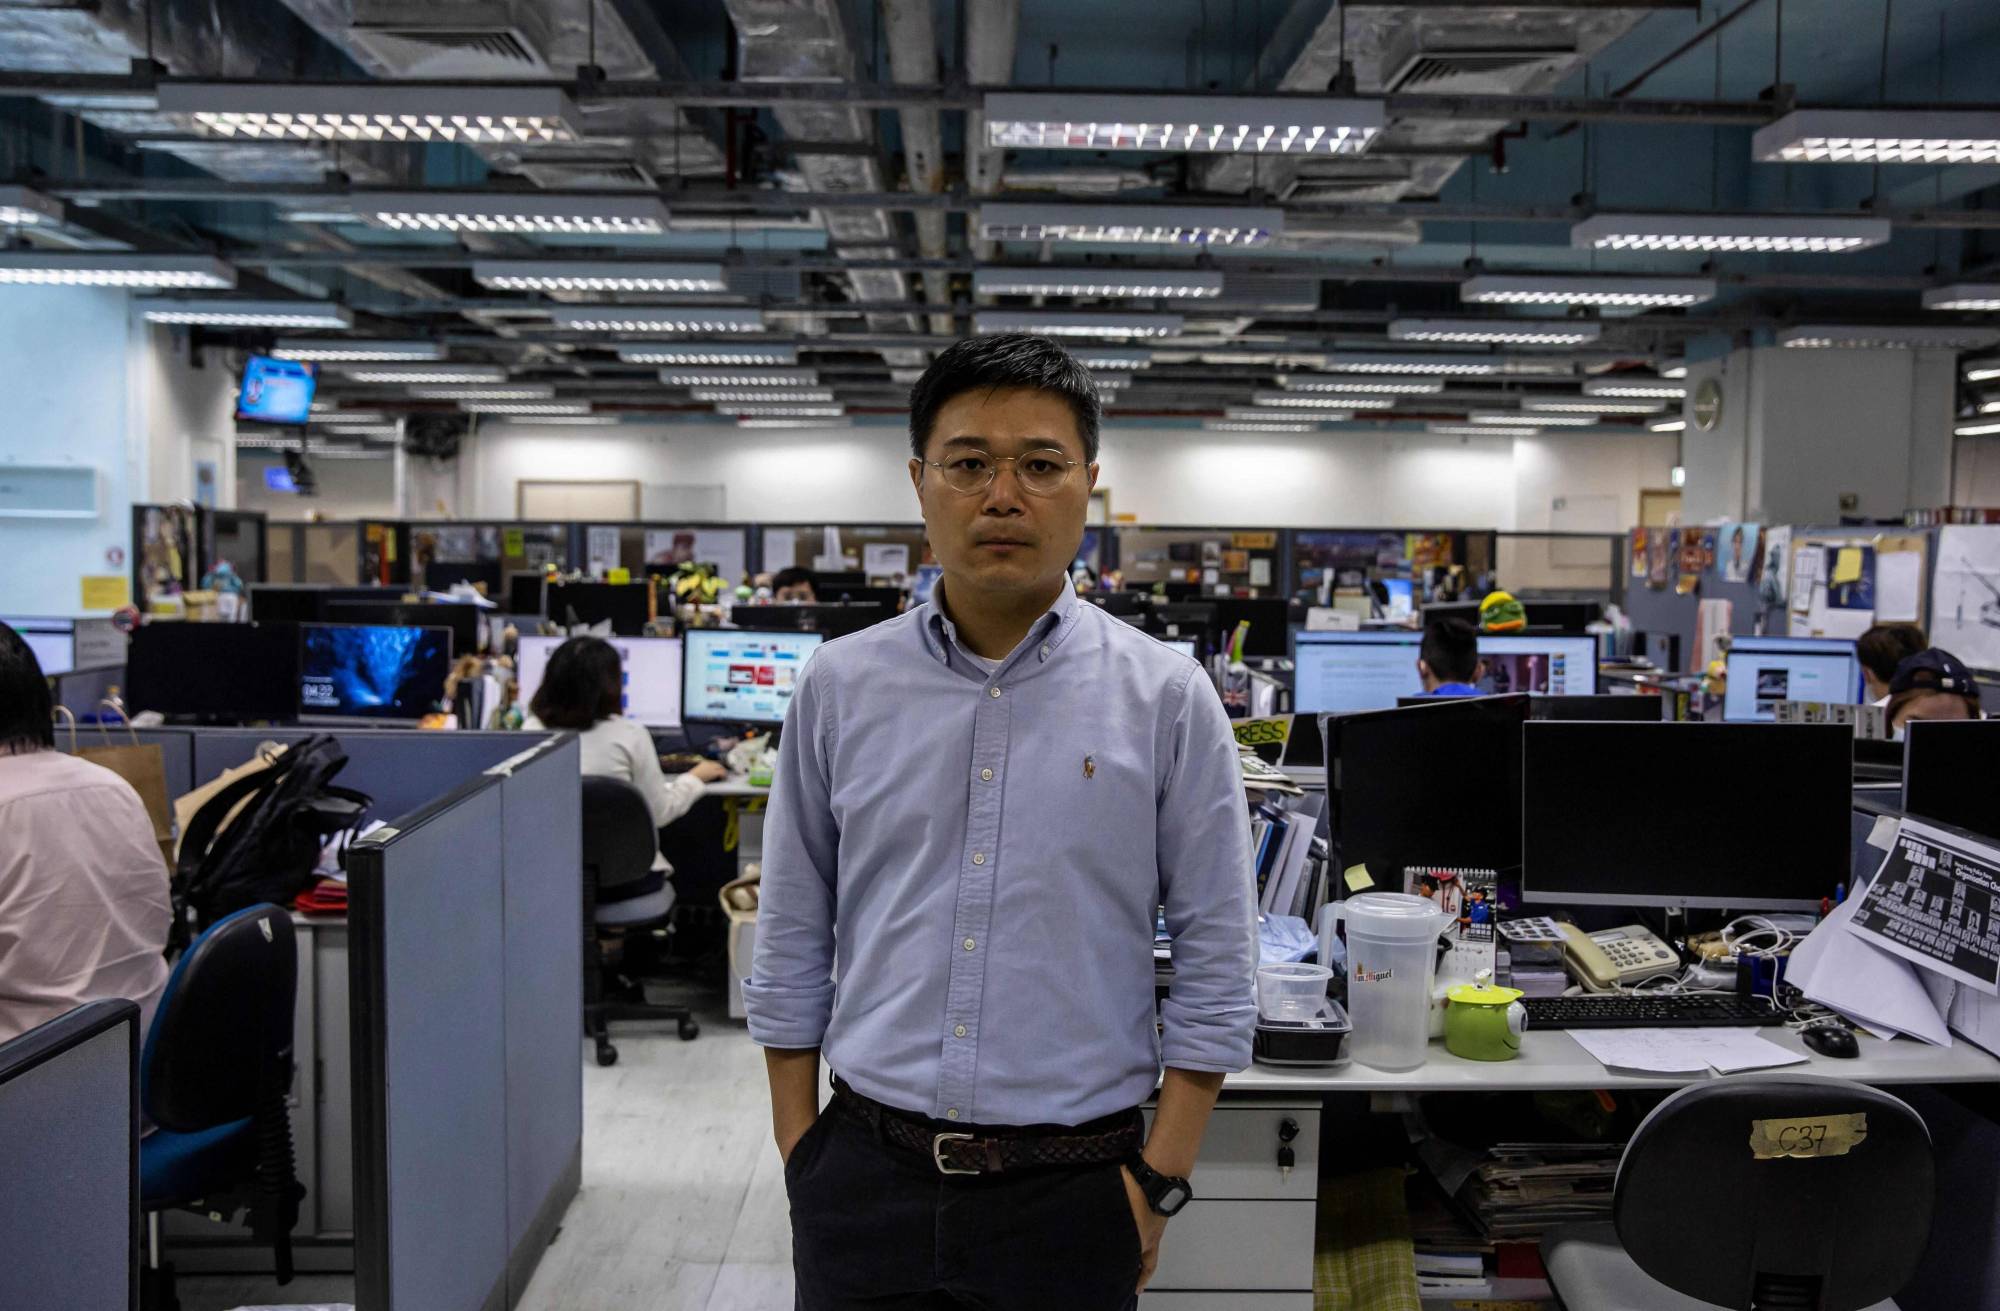 Apple Daily Editor-in-Chief Ryan Law in the outlet's newsroom in Hong Kong on May 13 | AFP-JIJI